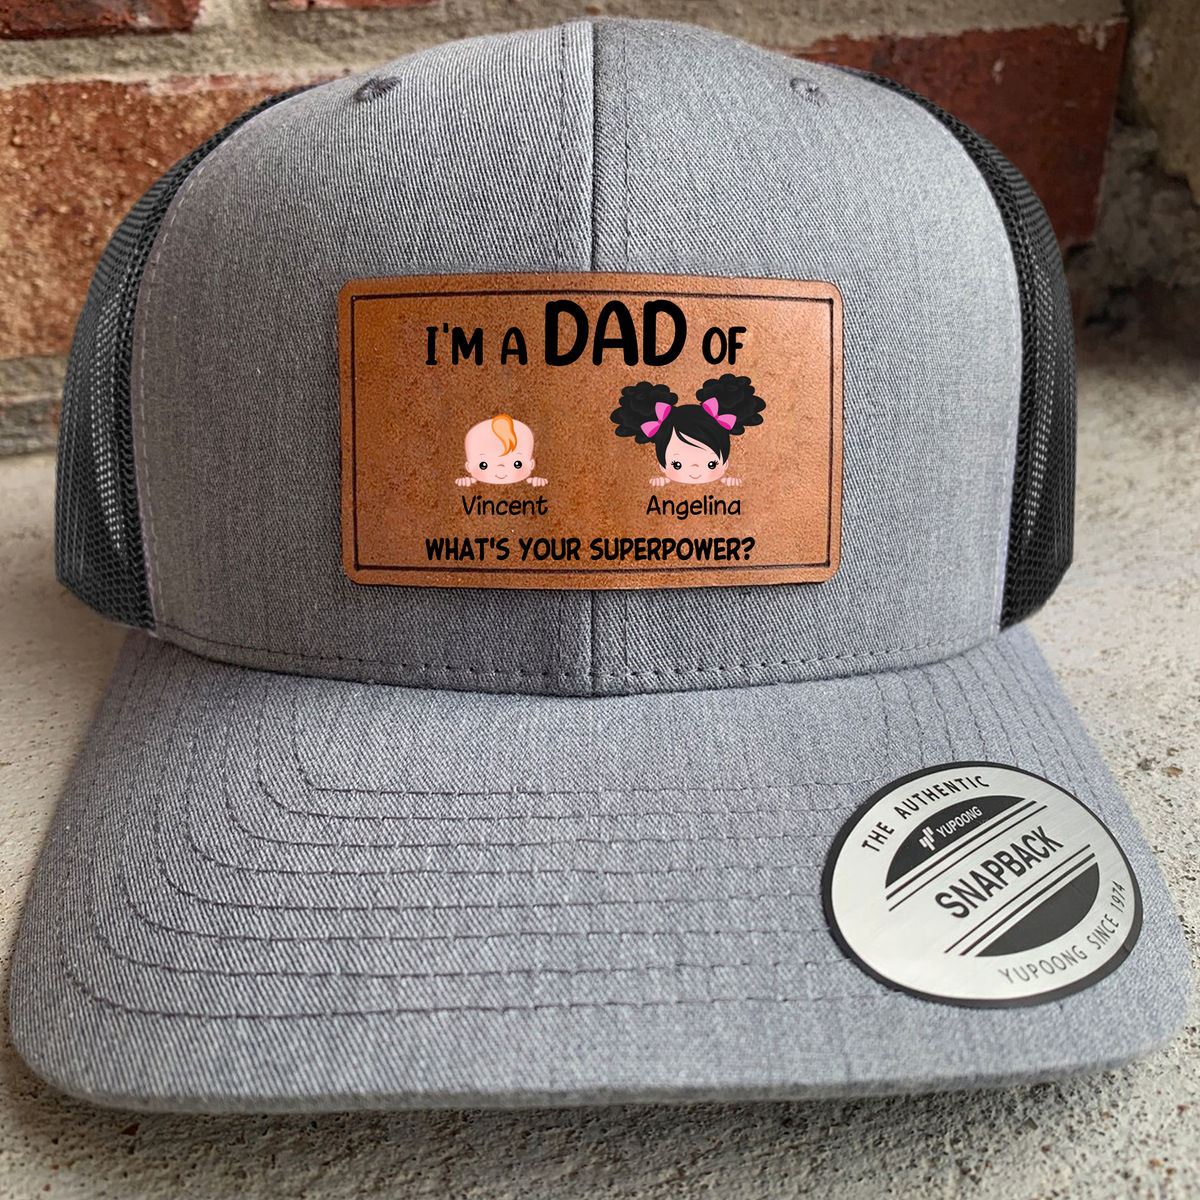 Father's Day Gifts - I'm A Dad Of Kid What's Your Superpower? (Ver 2) - Personalized Cap_2